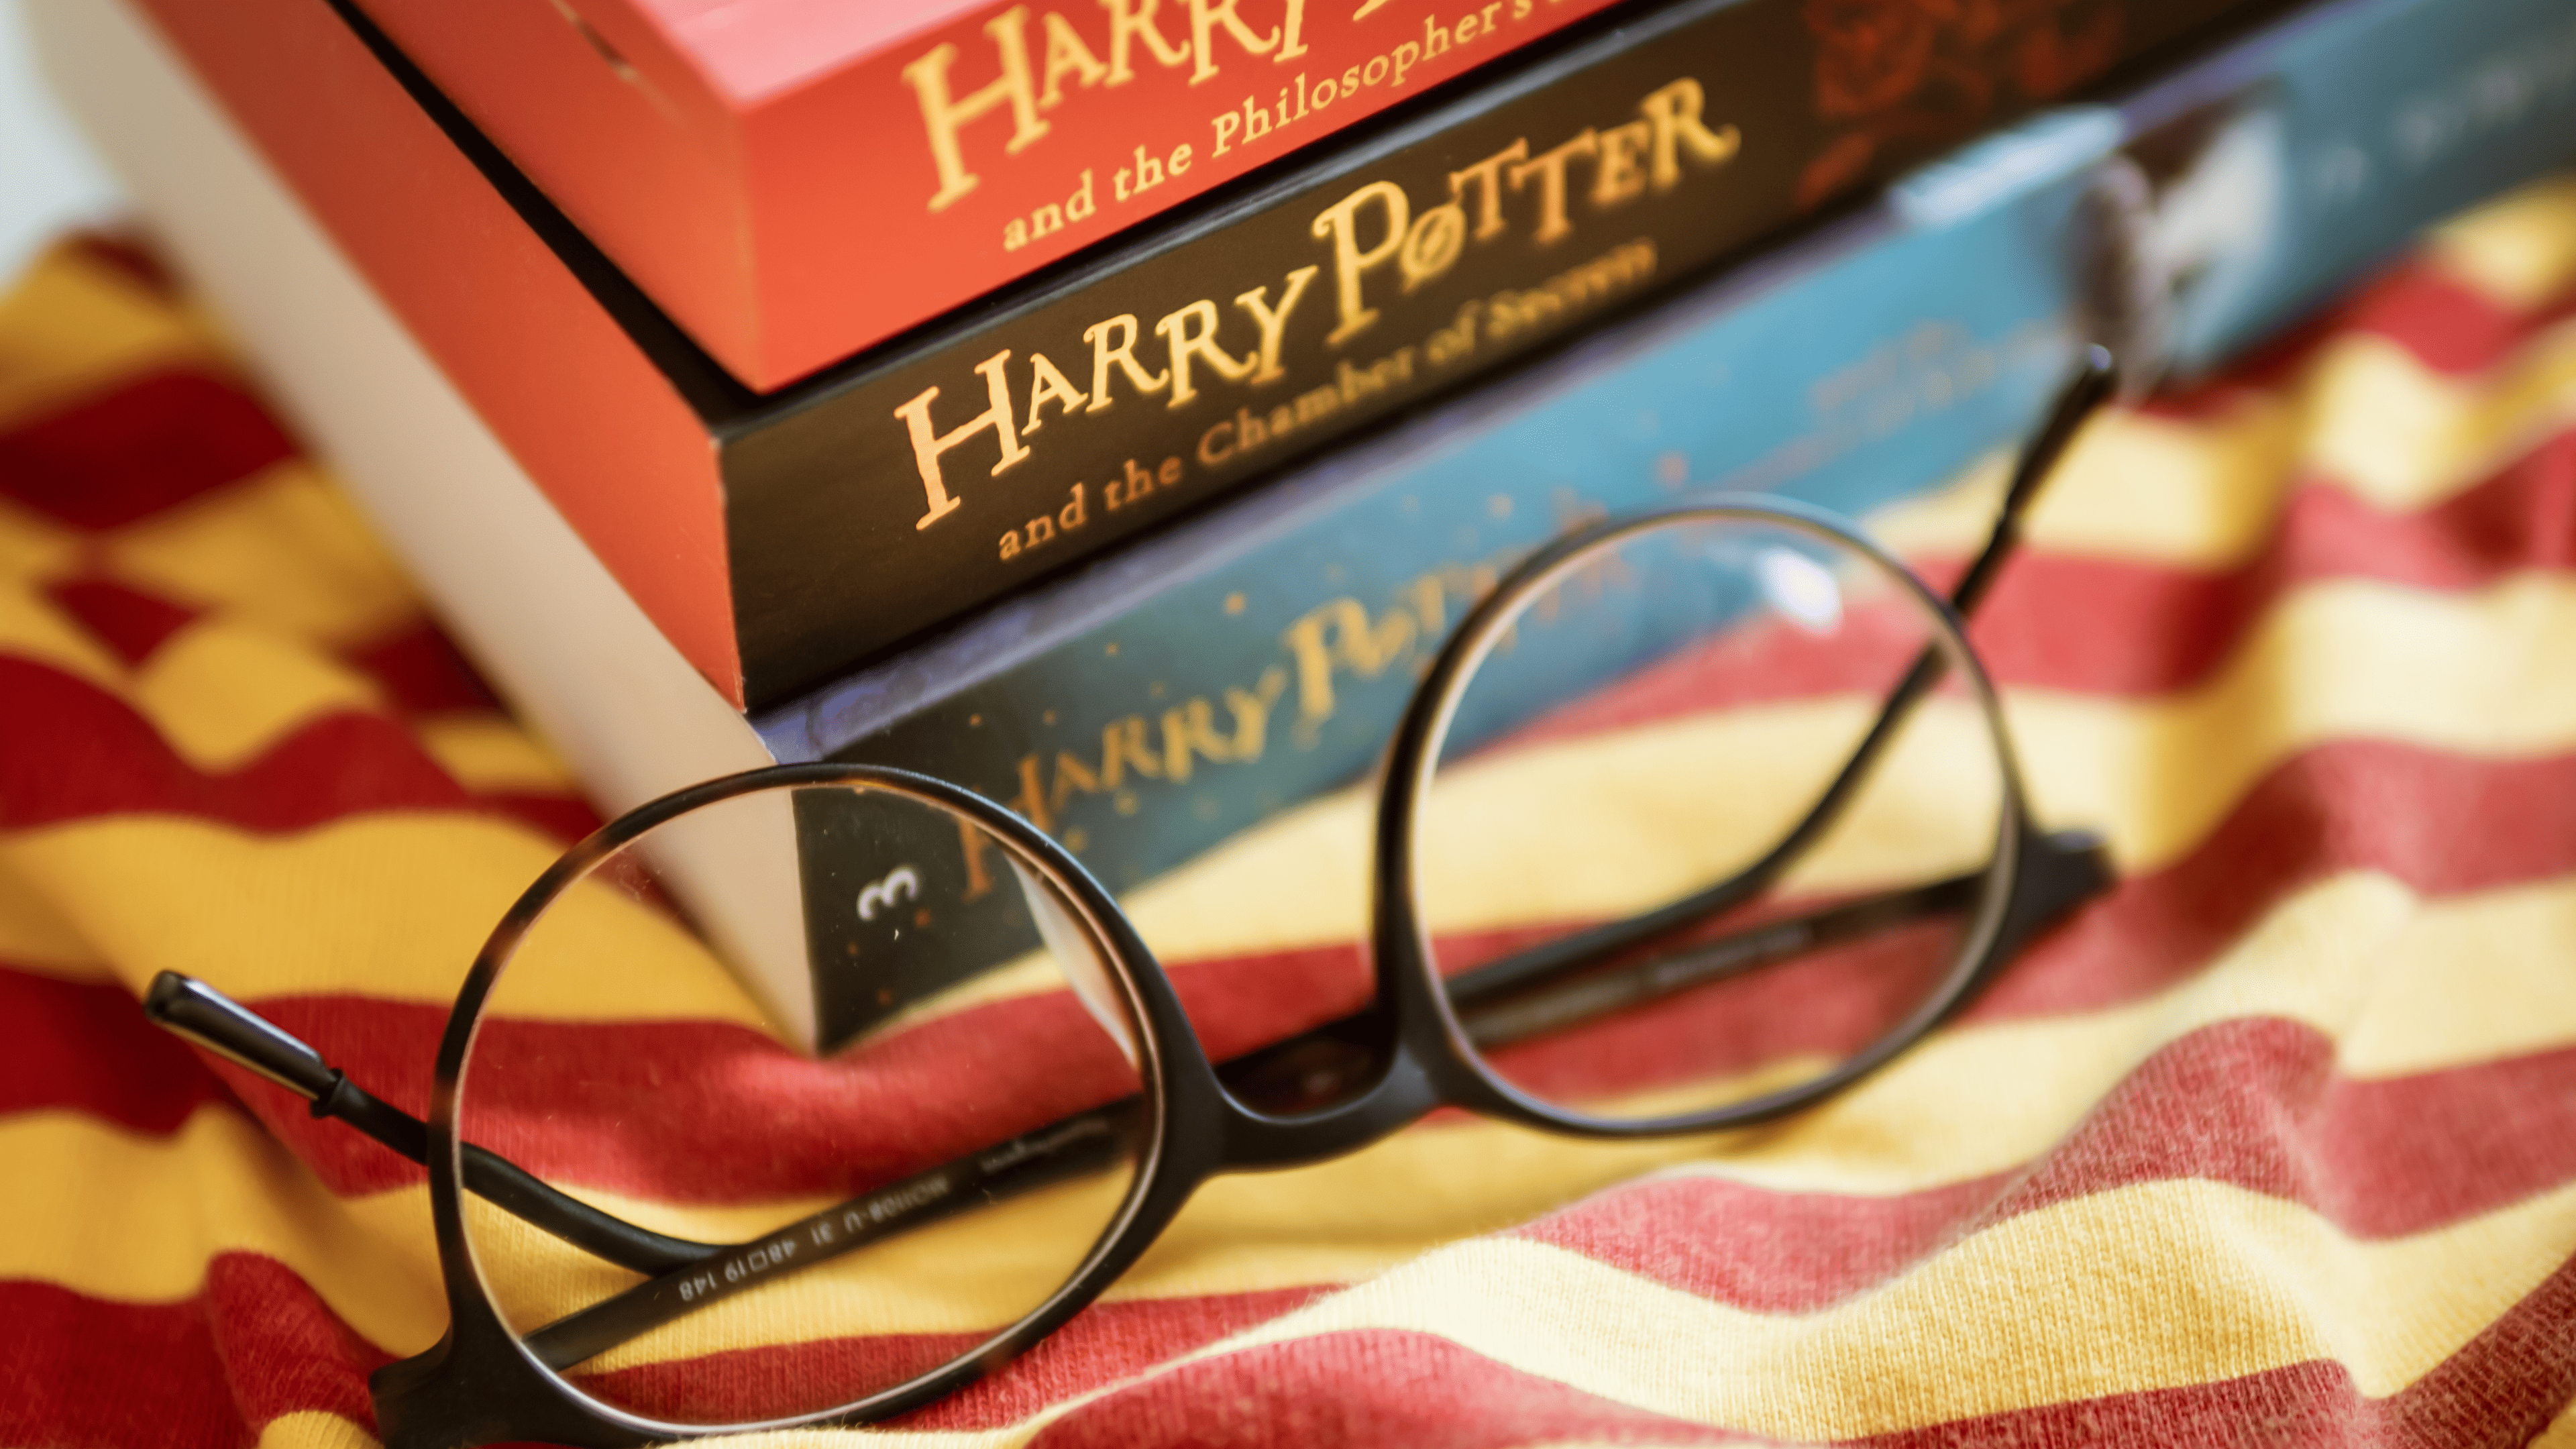 Harry Potter Books and round glasses